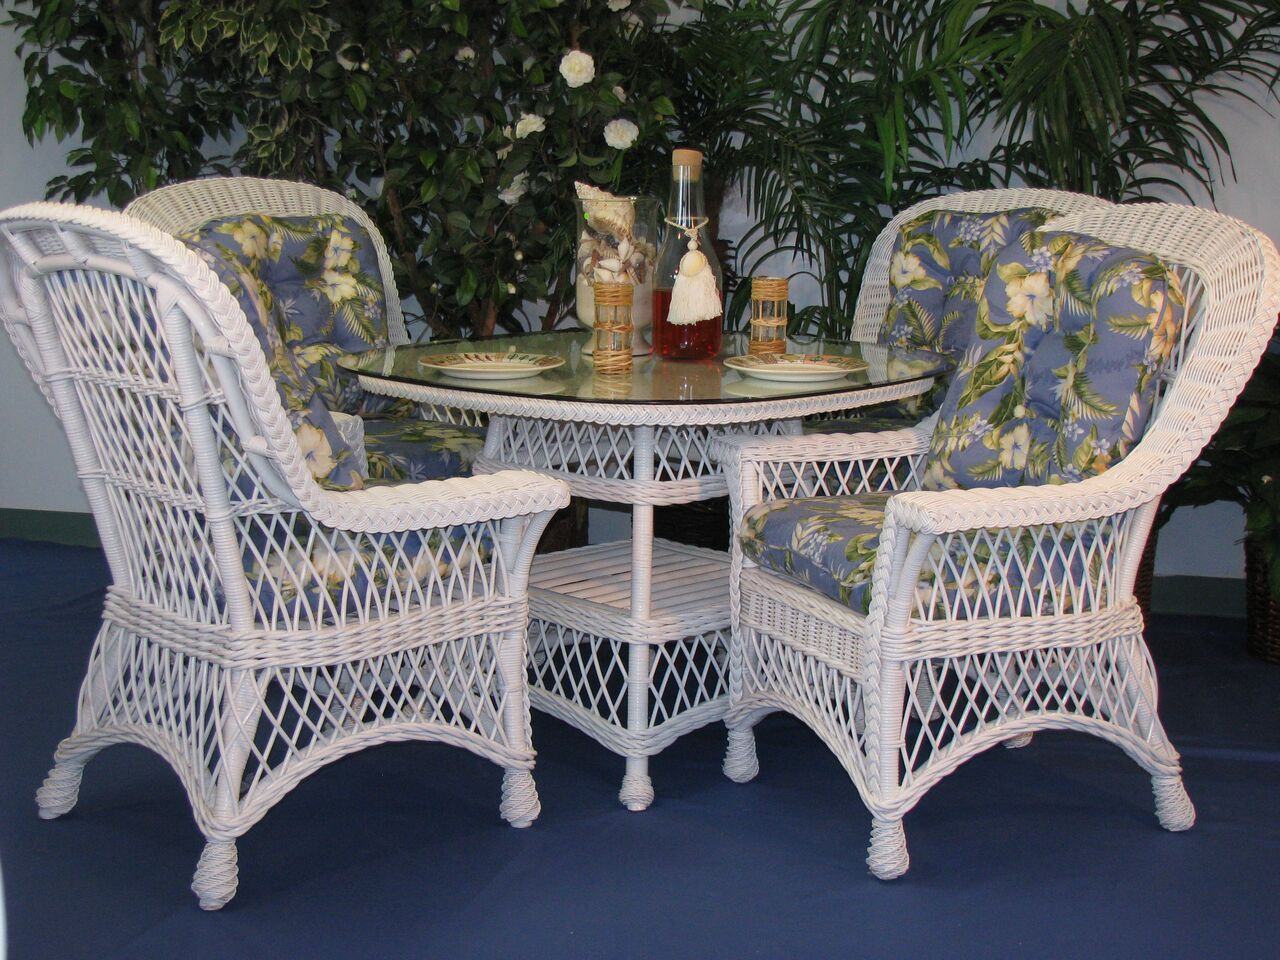 Spice Islands Spice Islands Bar Harbor Dining Table in White by Spice Islands - No Glass Top Dining Table - Rattan Imports